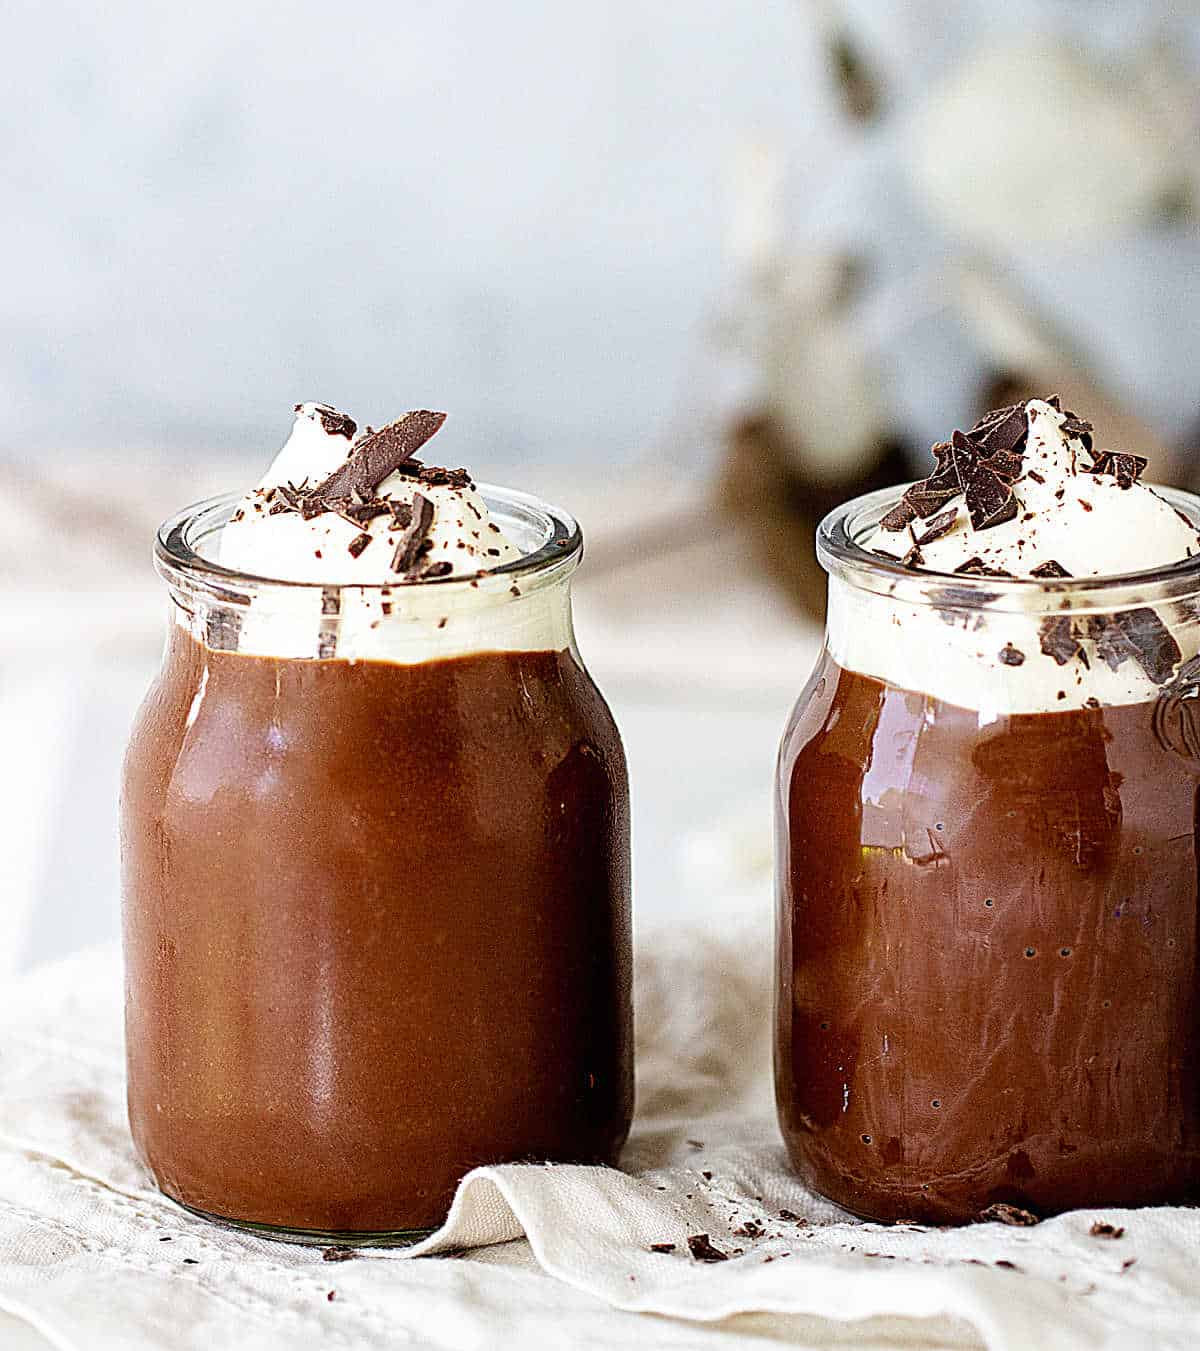 Frontal view of two jars with chocolate pudding, whipped cream and chocolate shavings on grey white background